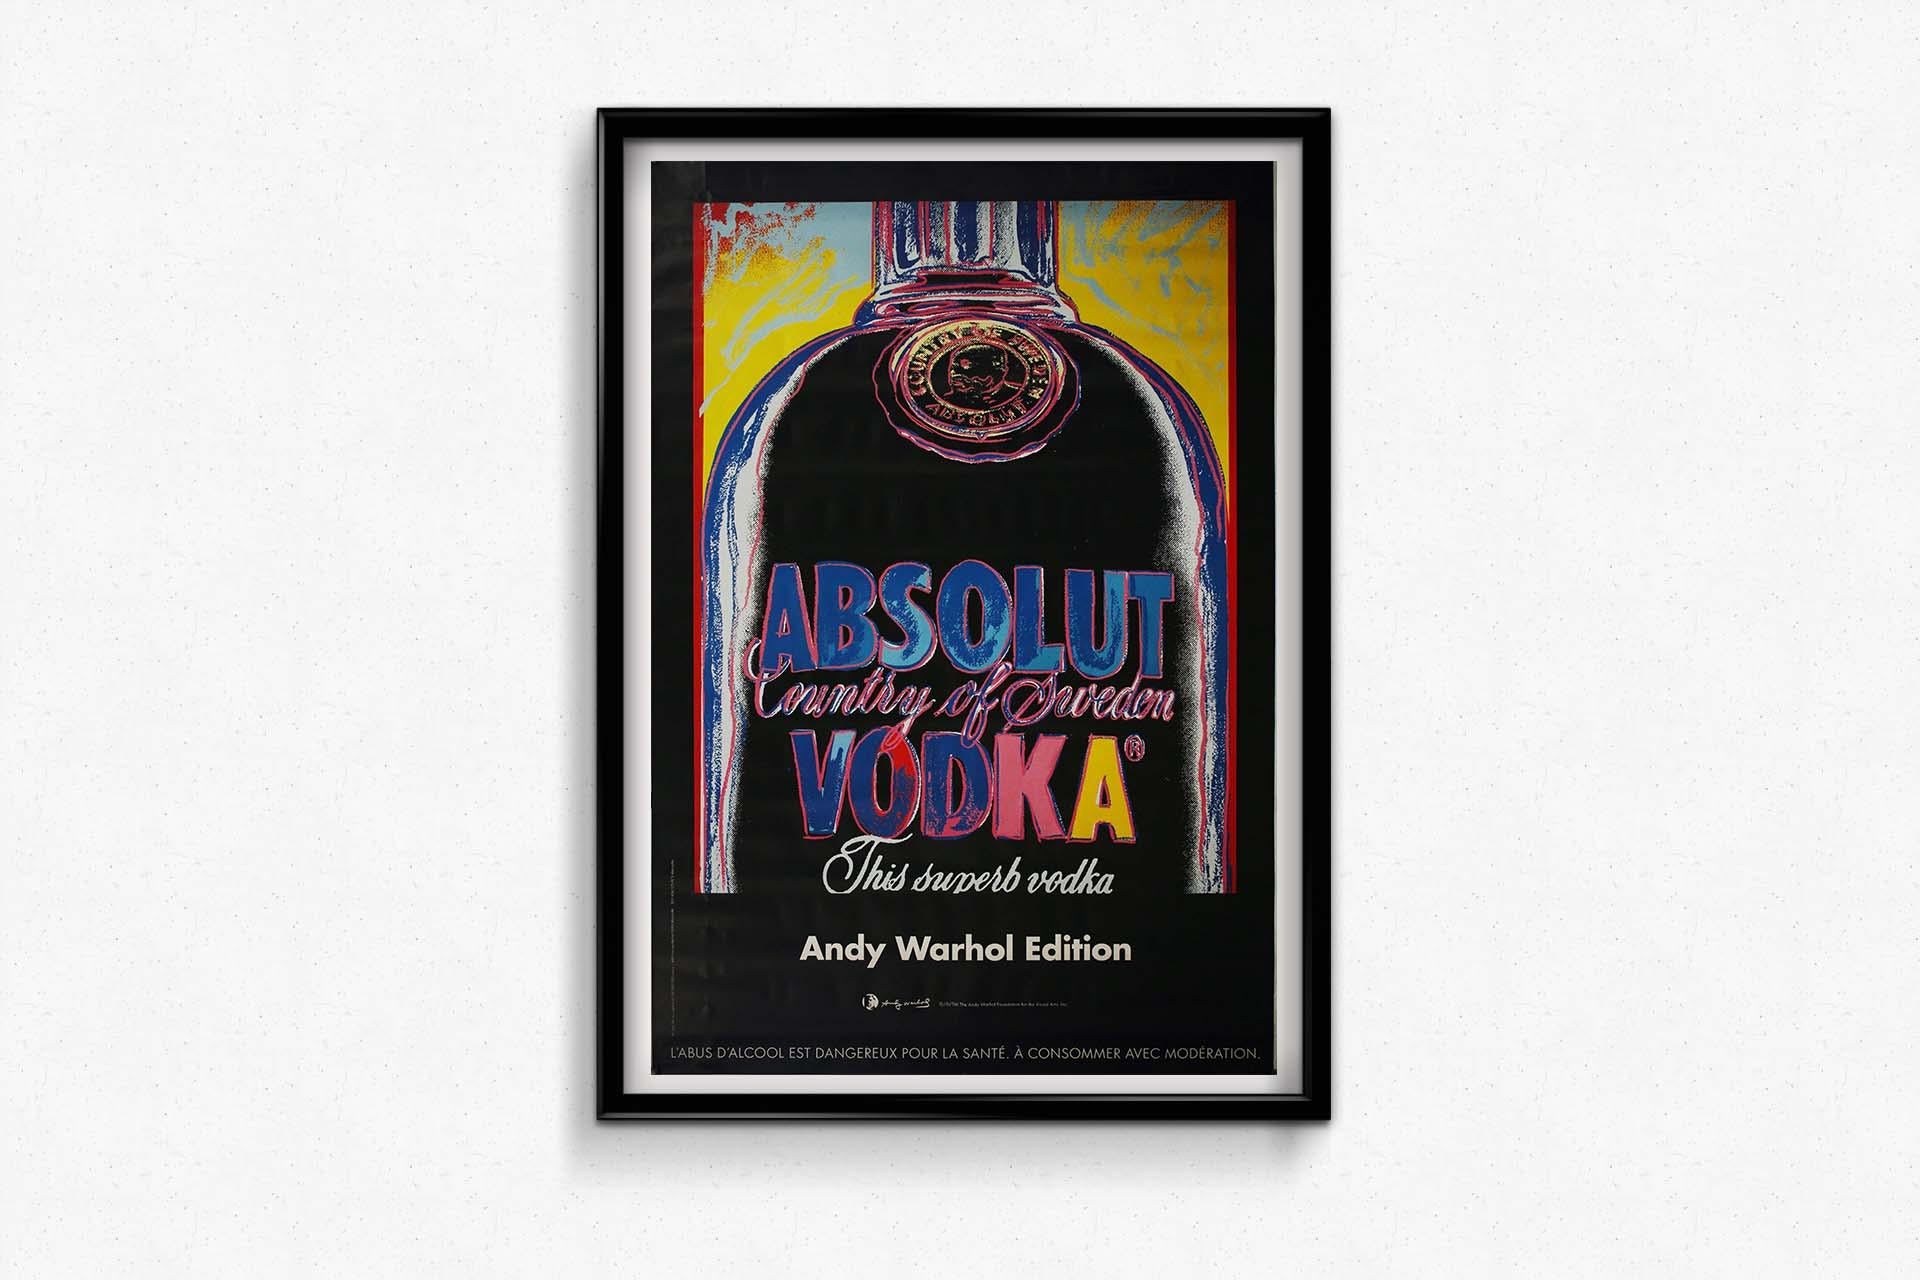 In the realm of pop art, Andy Warhol's influence is immeasurable, and his collaboration with Absolut Vodka in the creation of a unique exhibition poster is a testament to his ability to transform everyday objects into art.

The original exhibition